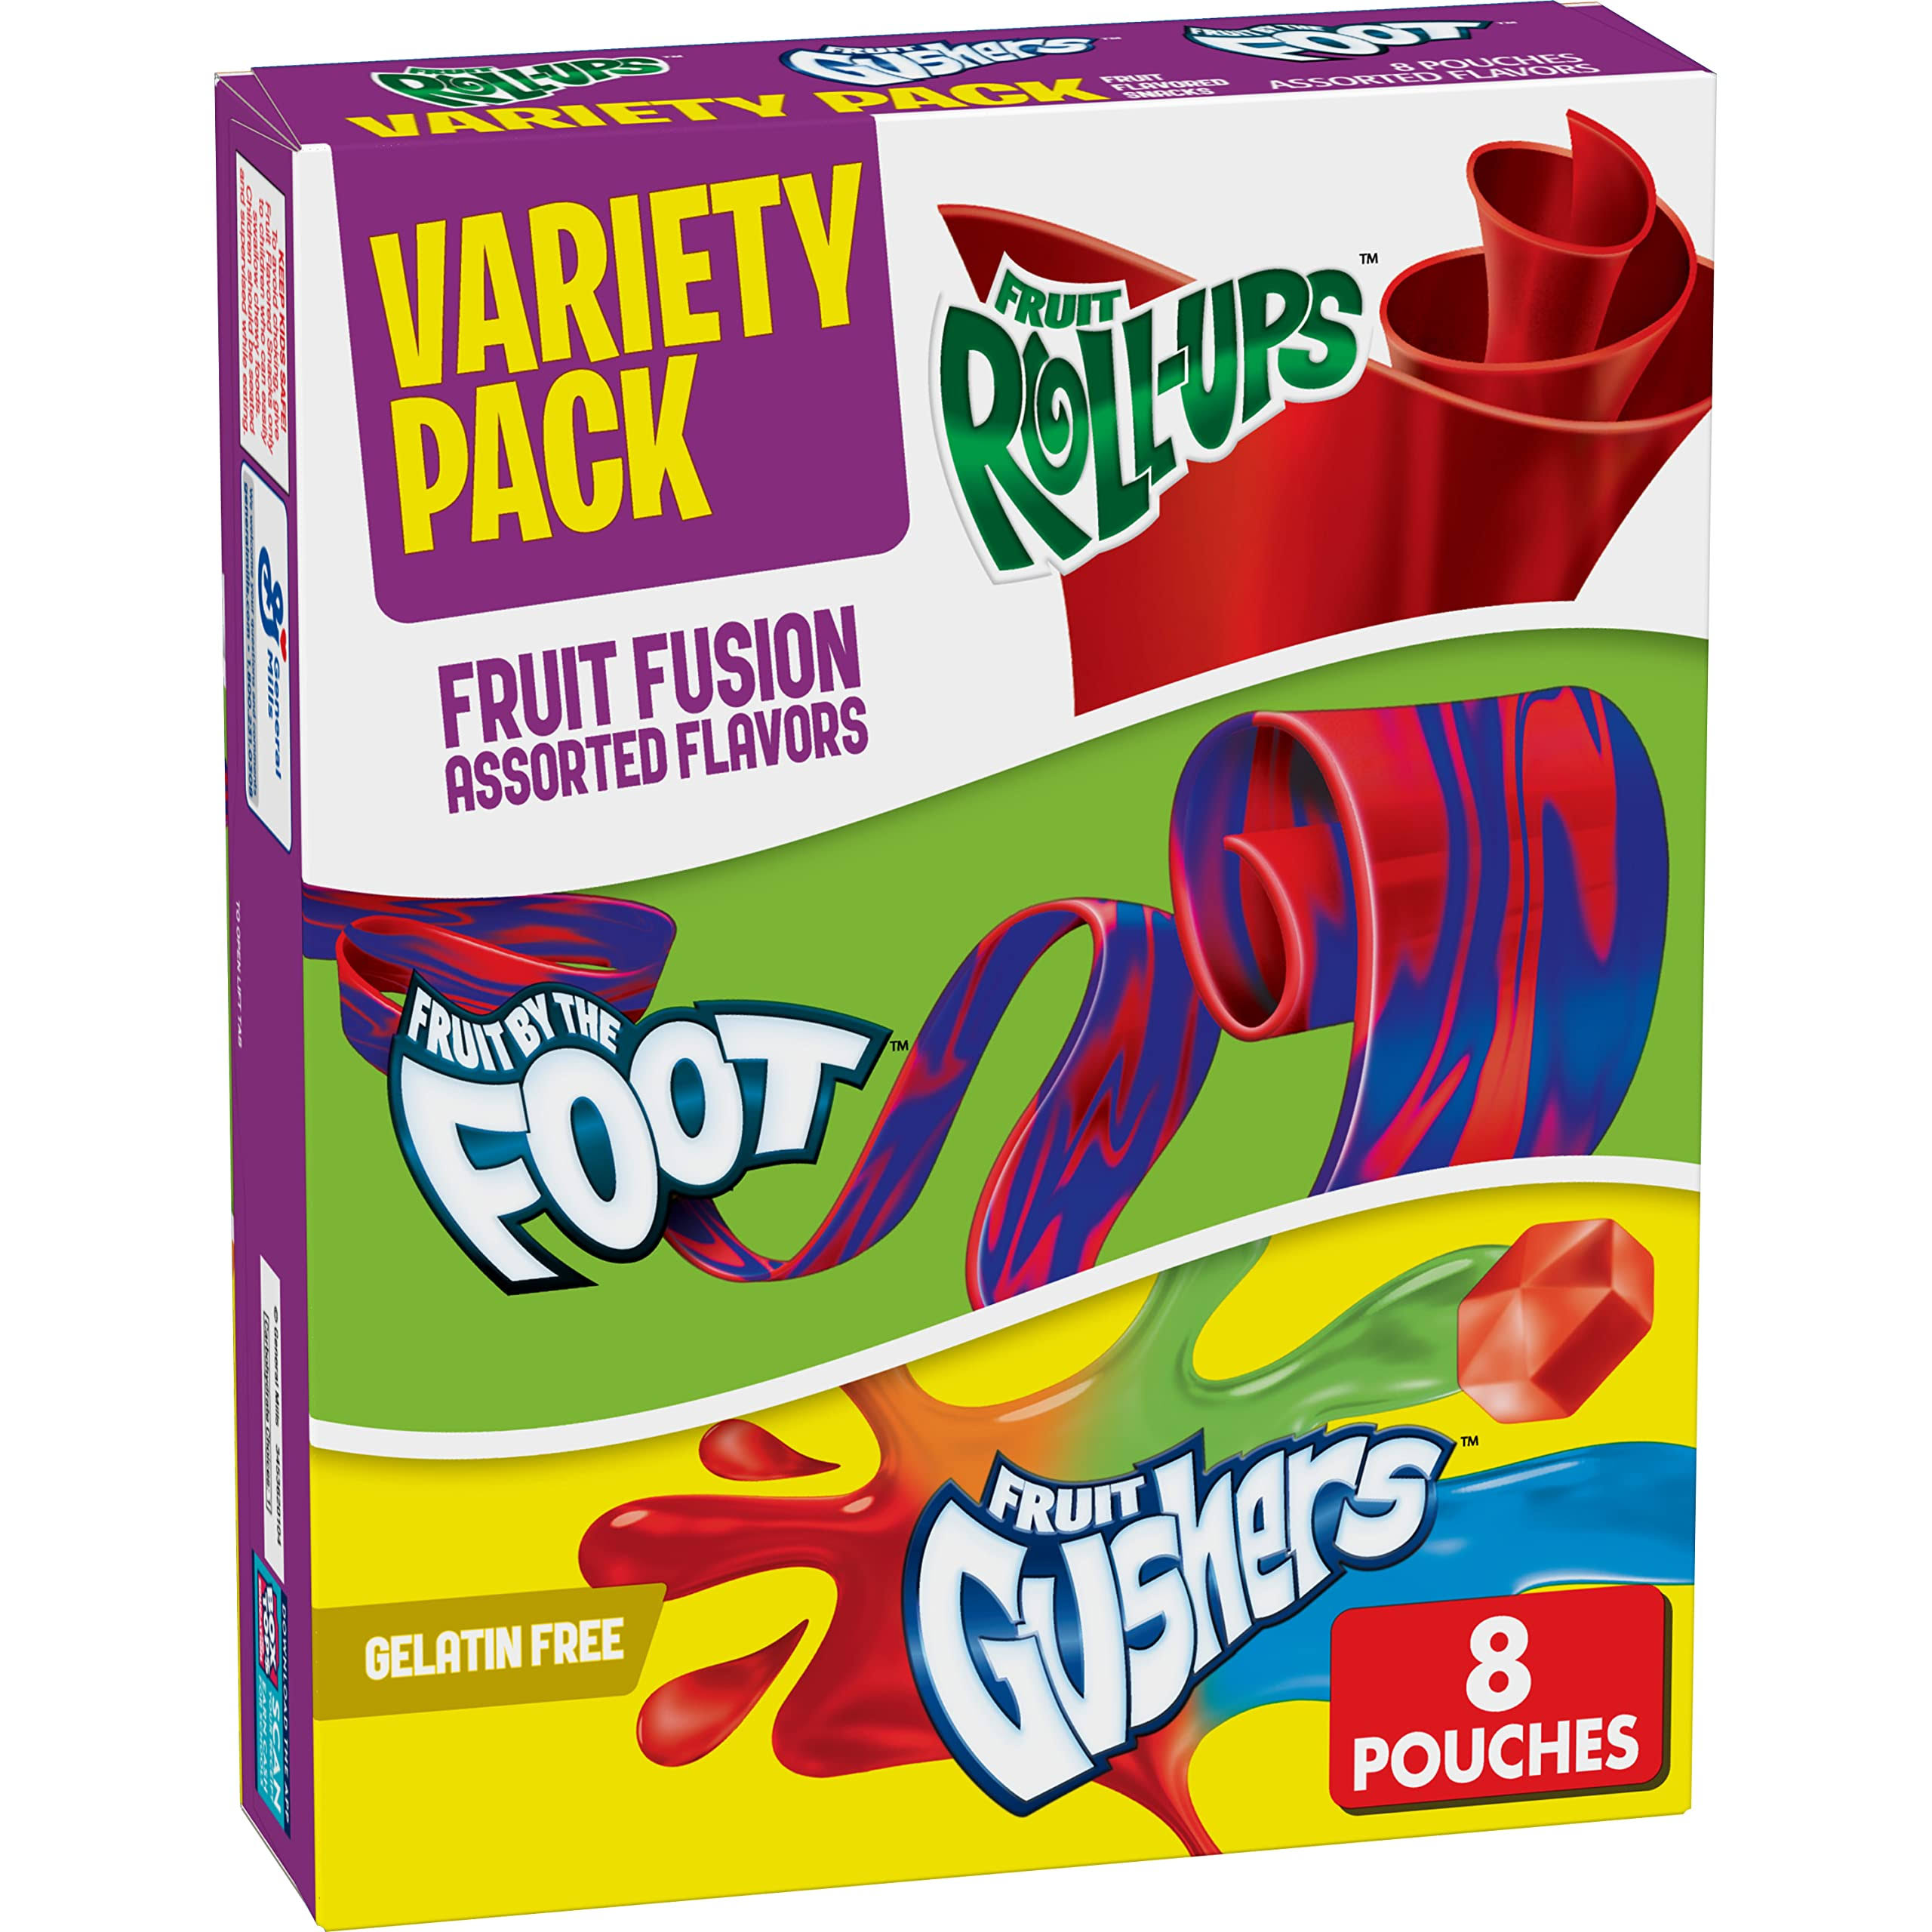 General Mills Fruit Flavored Snacks, Fruit Fusion Assorted Flavors, Variety Pack, 8 Pack - 8 pouches, 5.1 oz